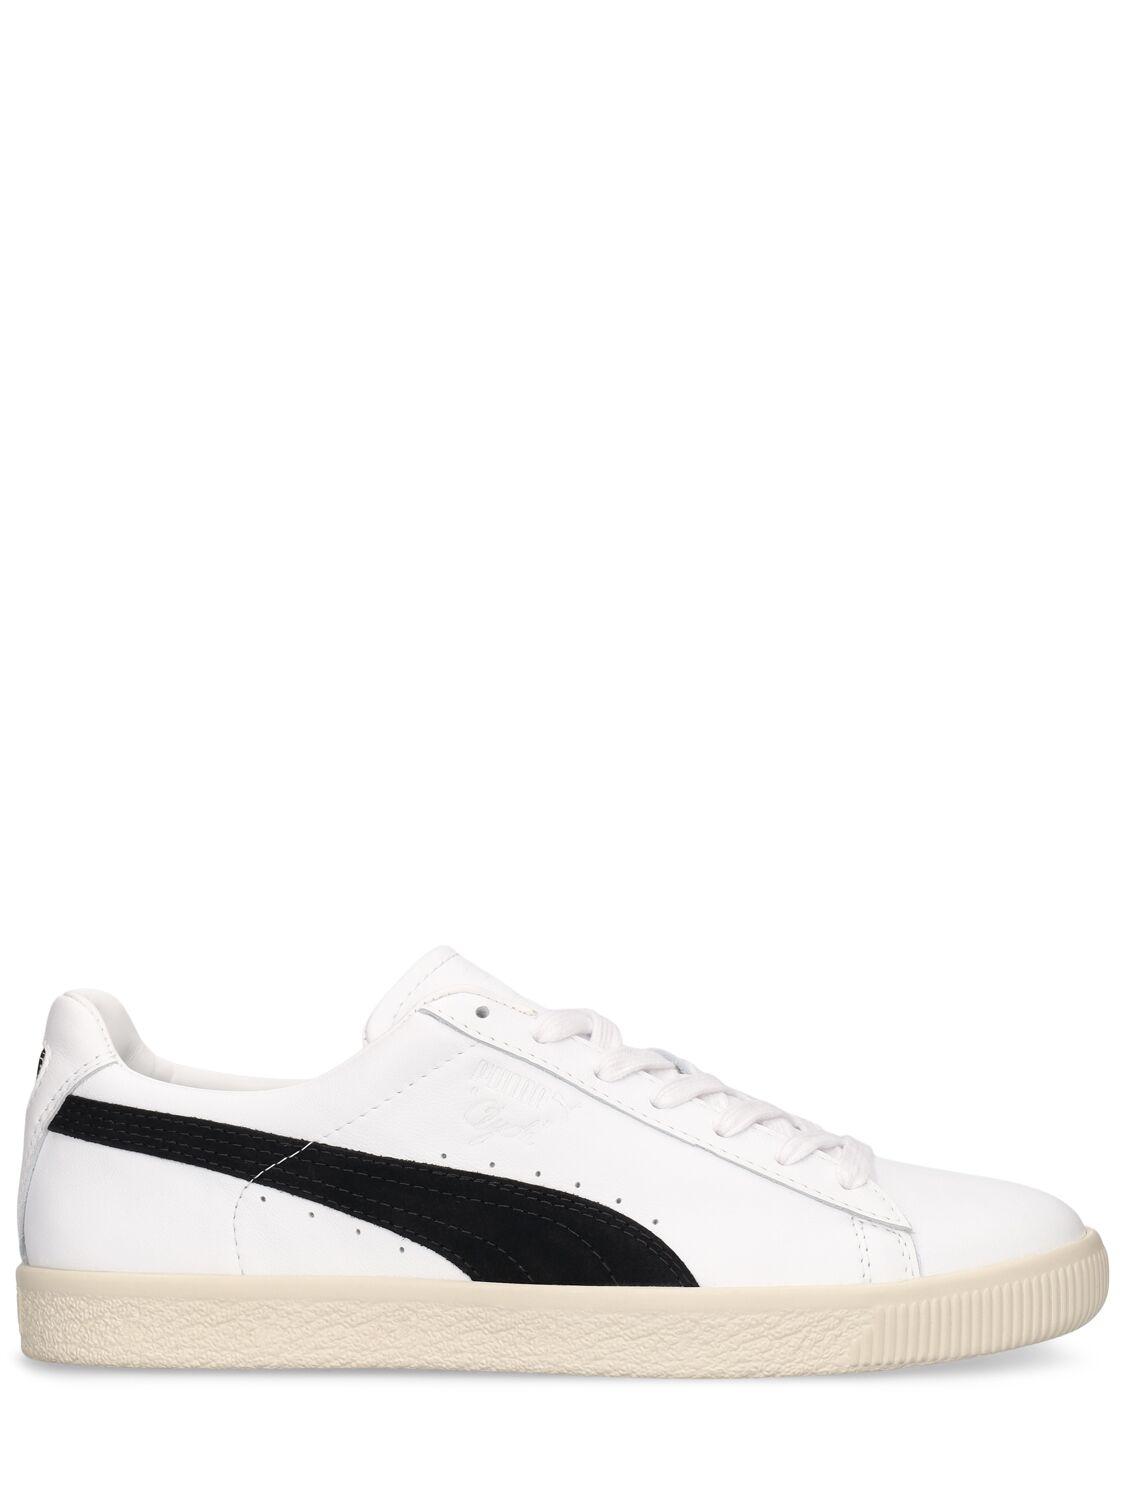 Puma Clyde Made In Germany Trainers In White